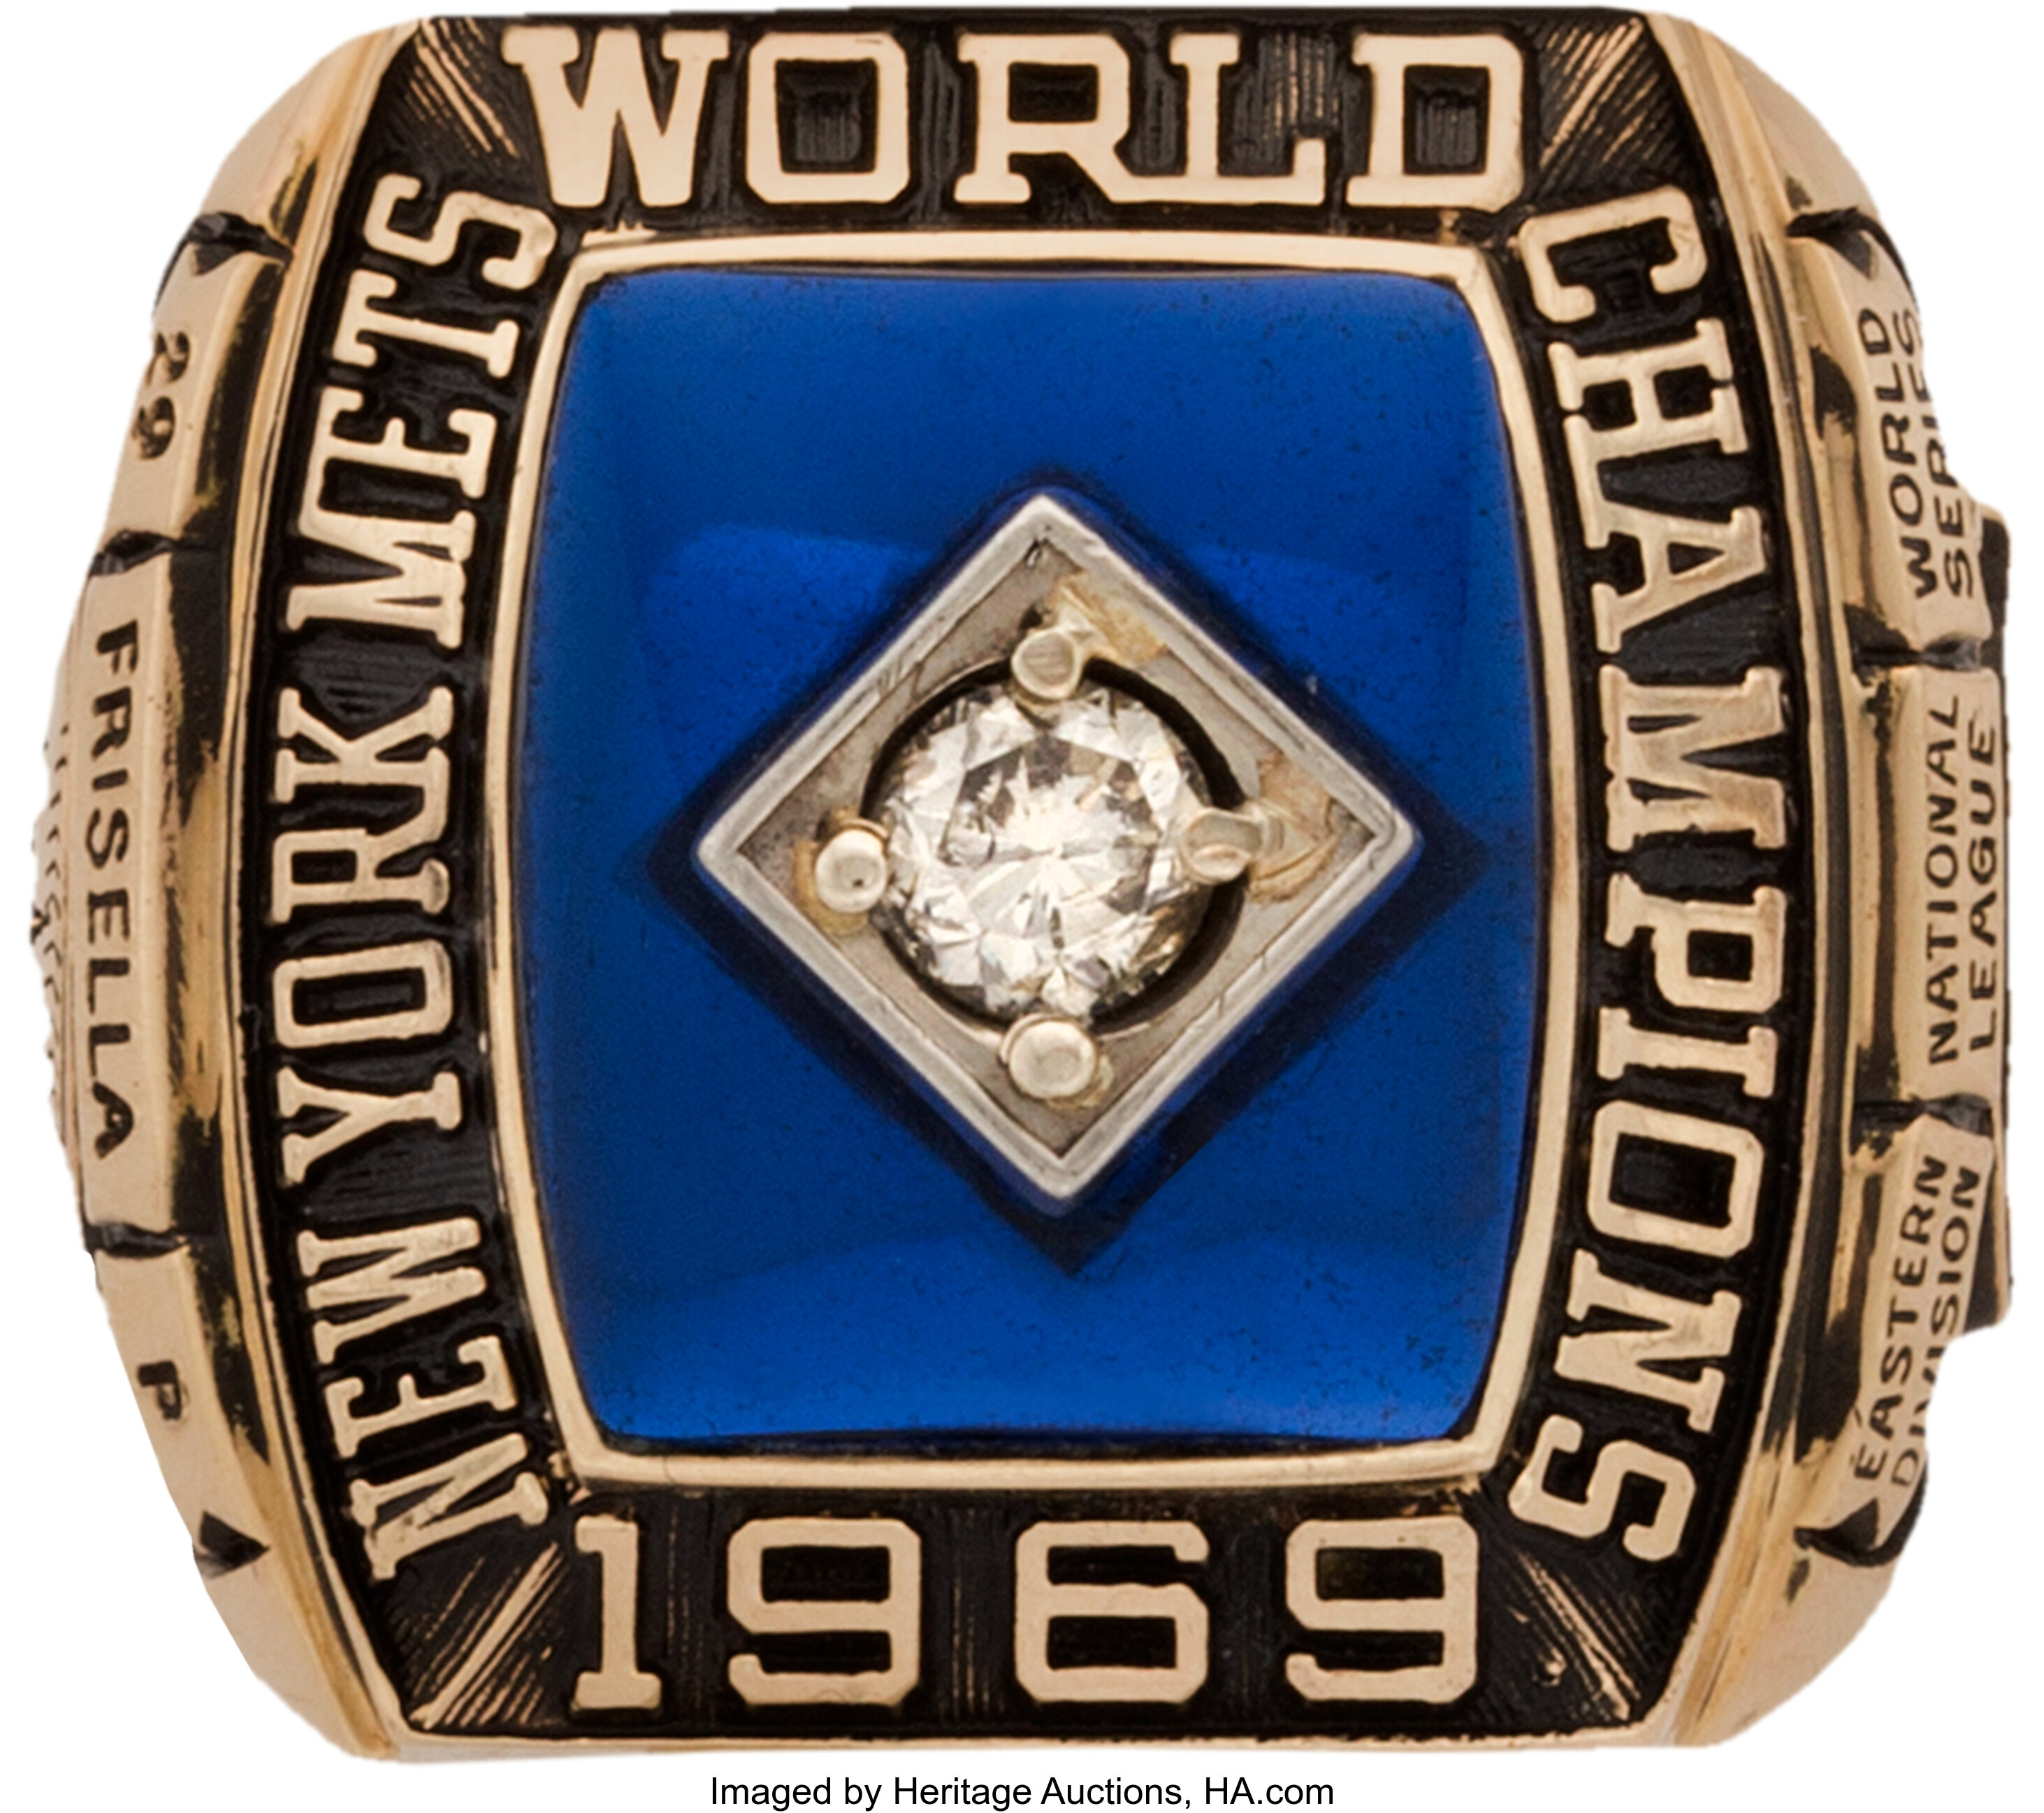 New York Mets 1969 World Series Championship Patch – The Emblem Source